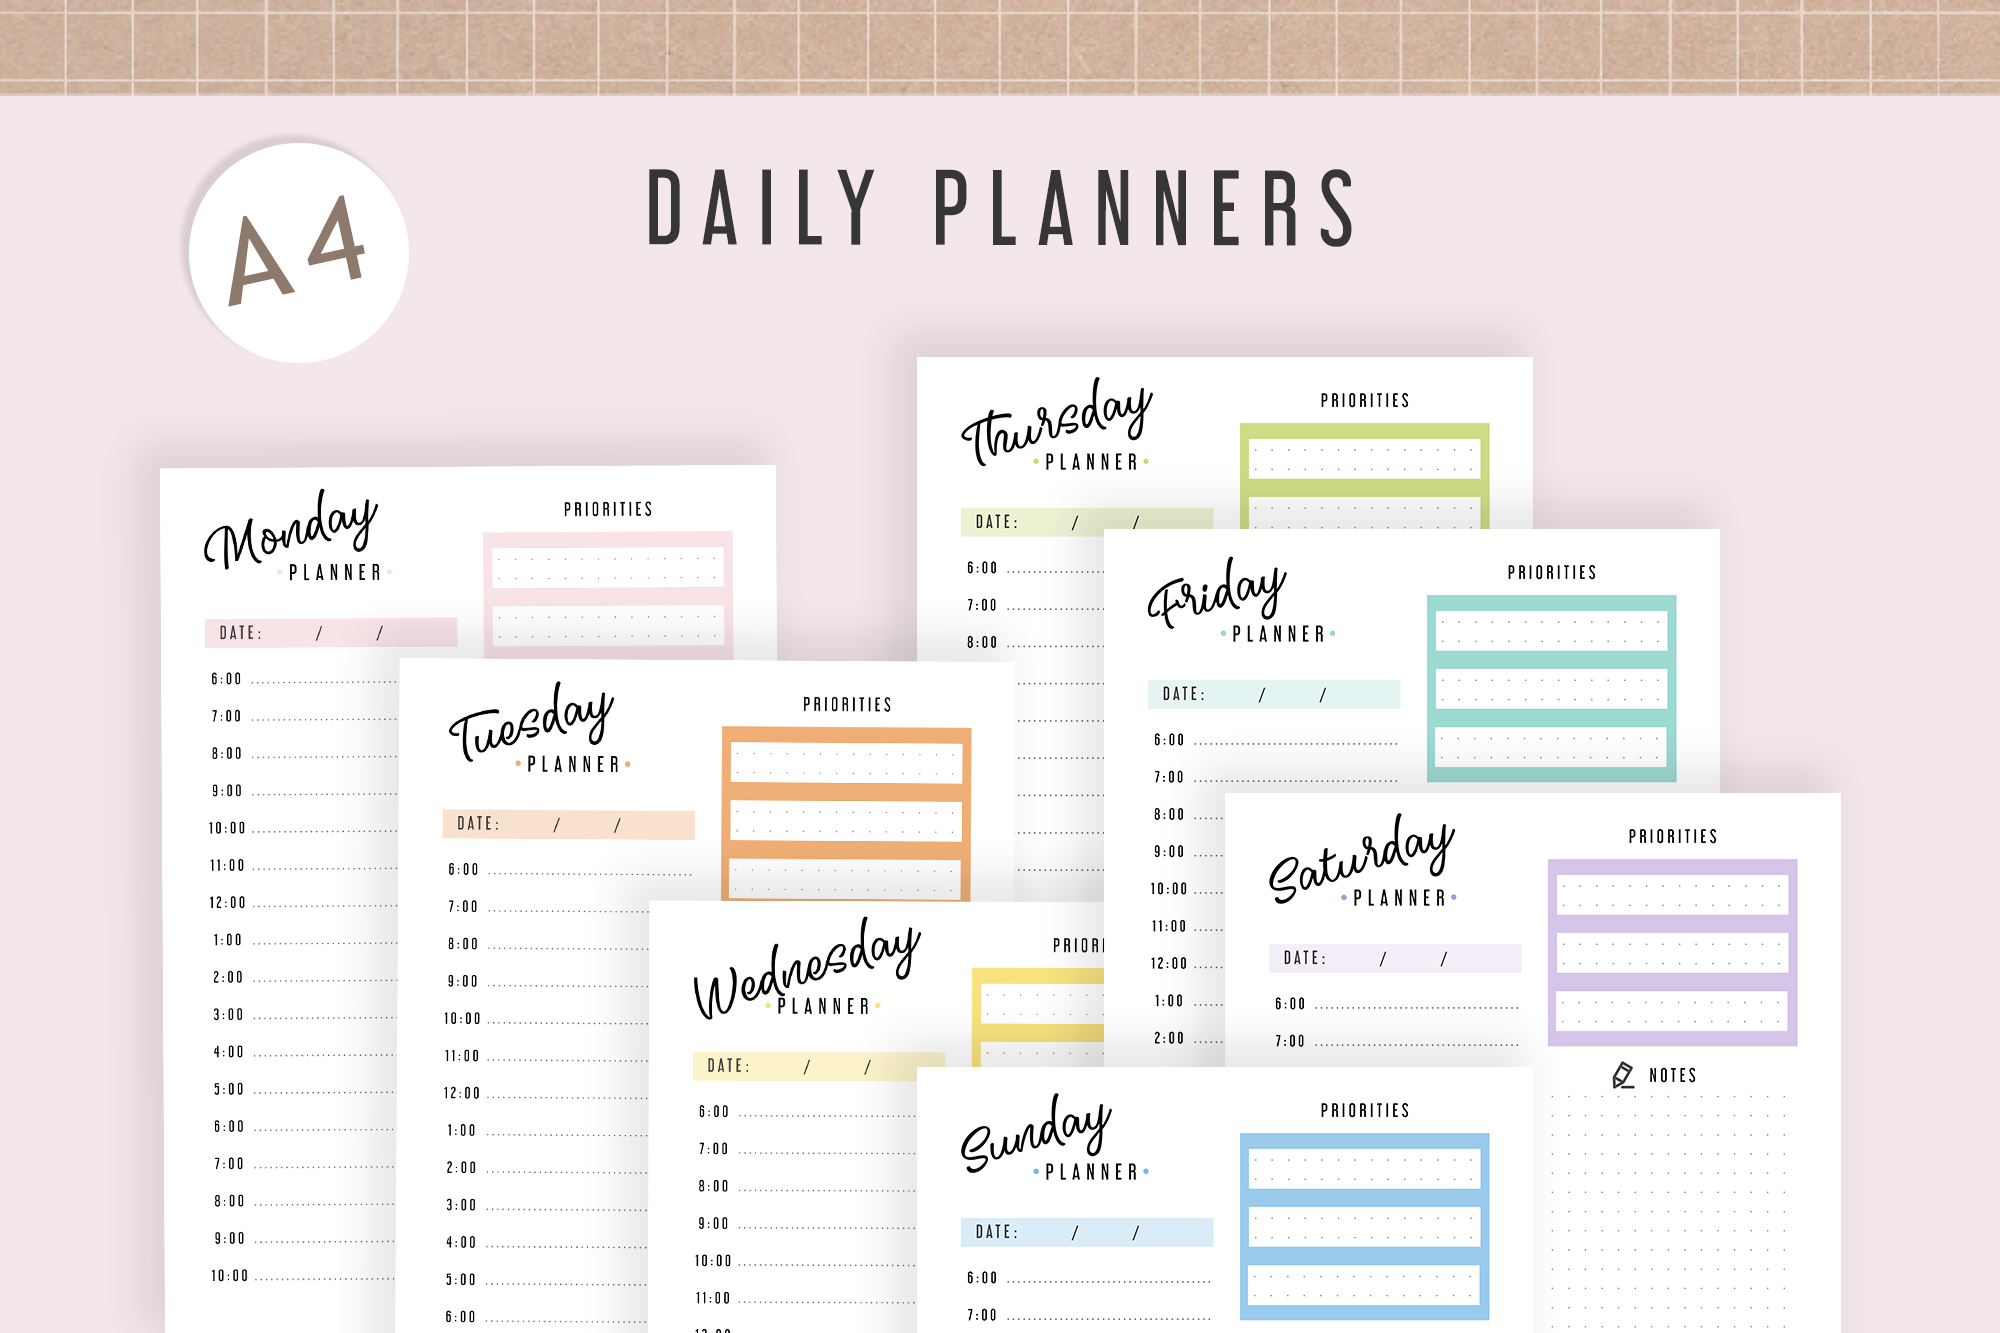 Daily plans. Day Planner. Daily Plan. Design планер шаблон. Daily Planner Printable.